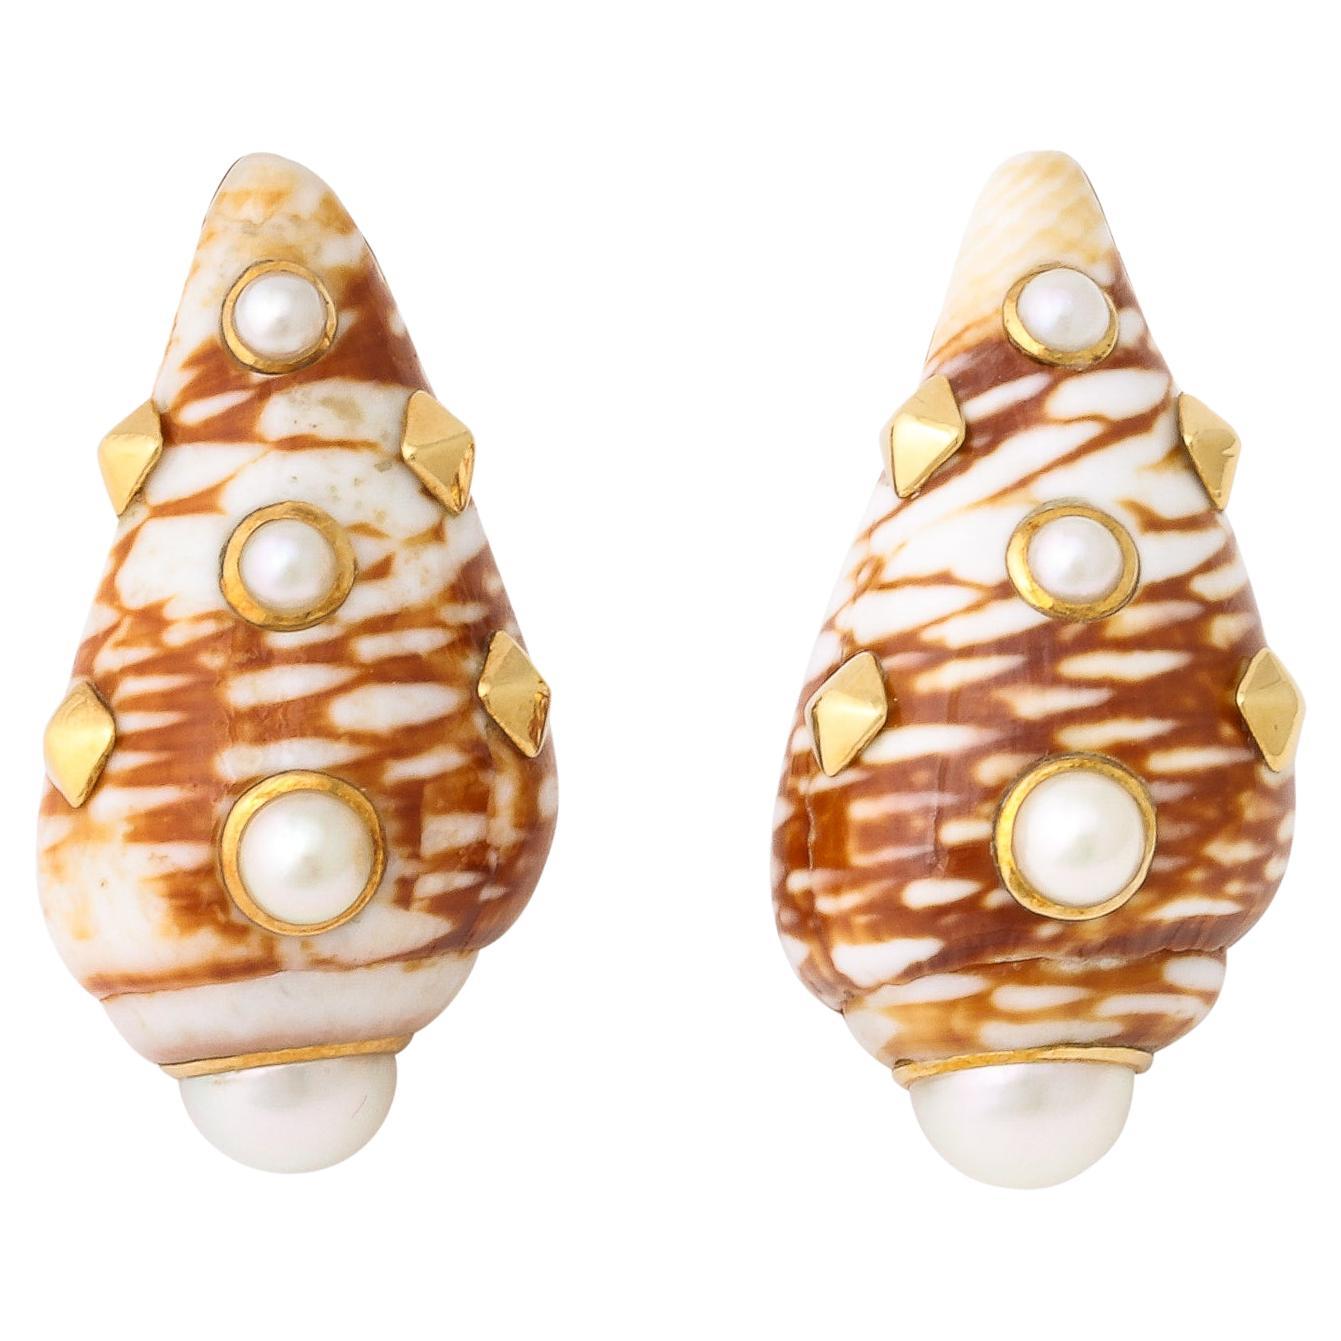 Red & Beige Shell Earrings Set in 18k Gold With Inlaid Pearls by Trianon For Sale